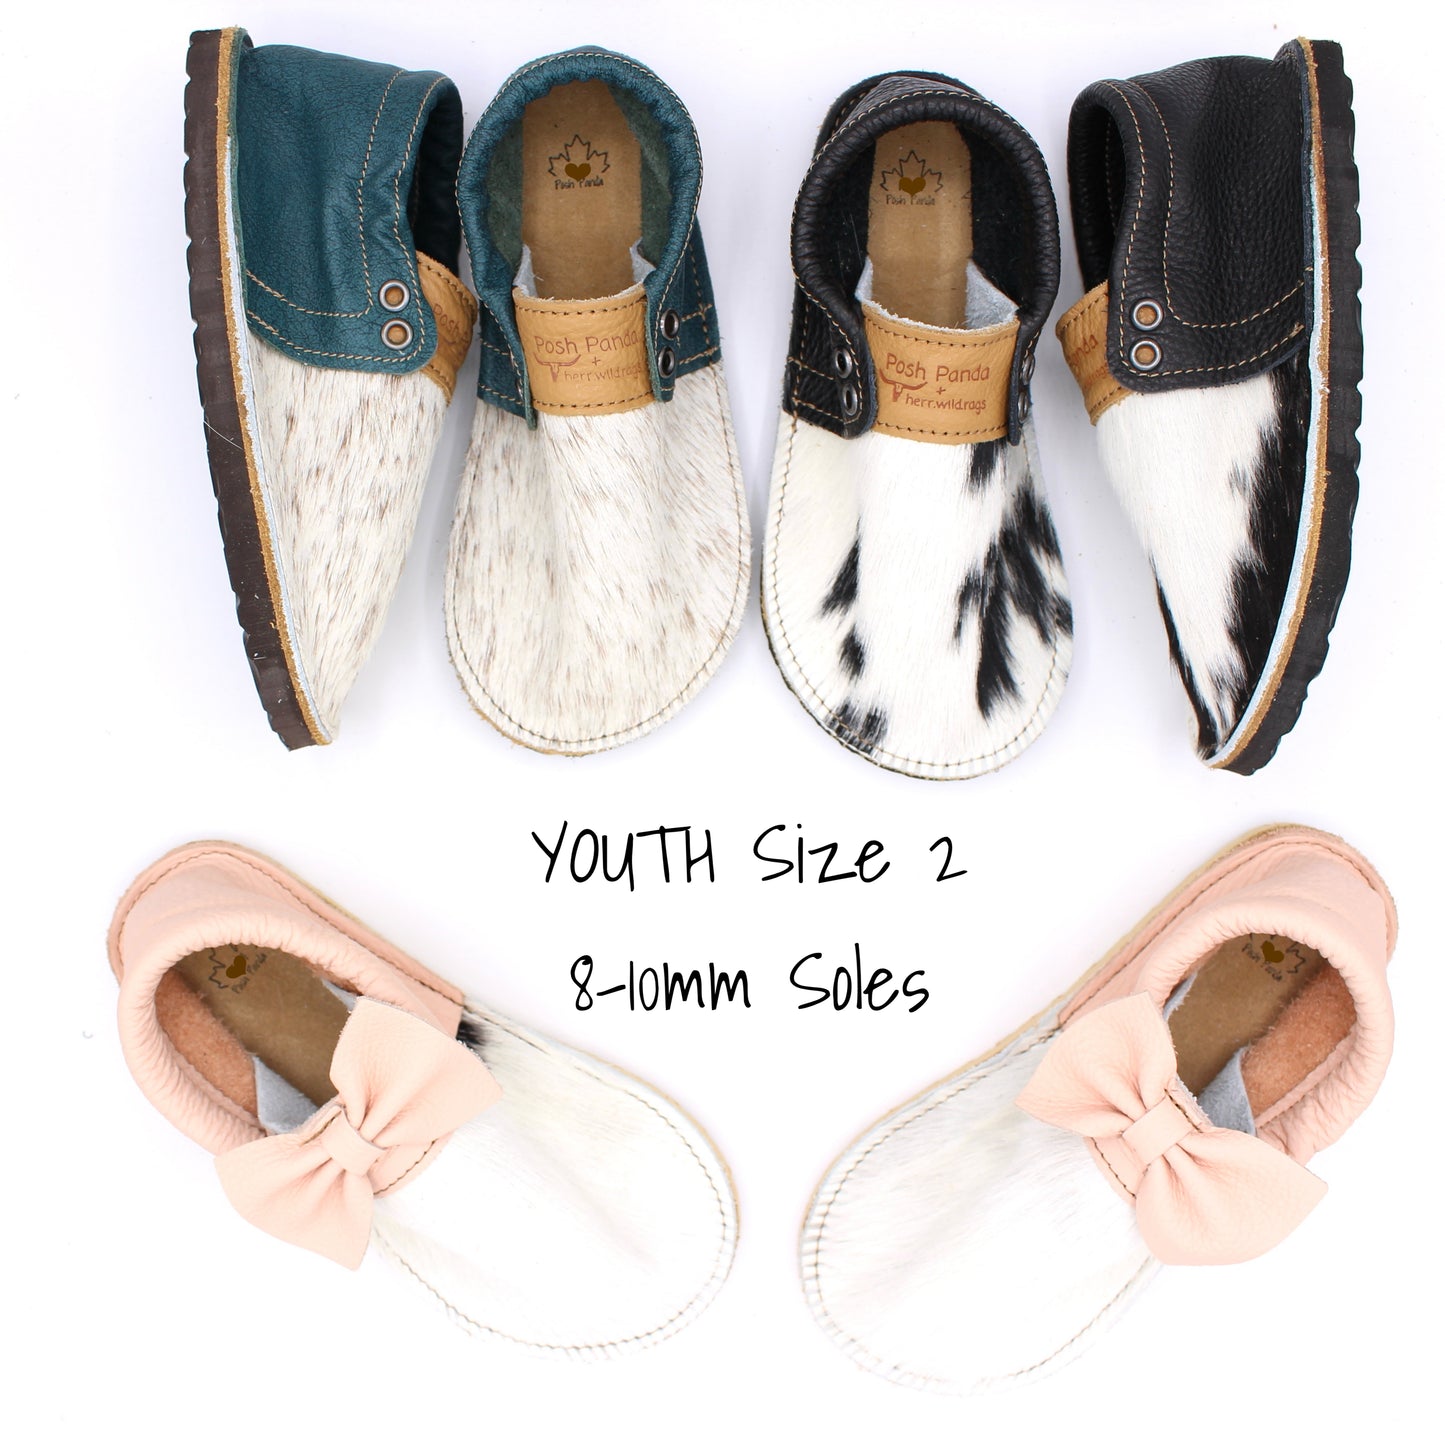 Hair Hide Mocs - YOUTH - Size 2 (RUGGED Sole)